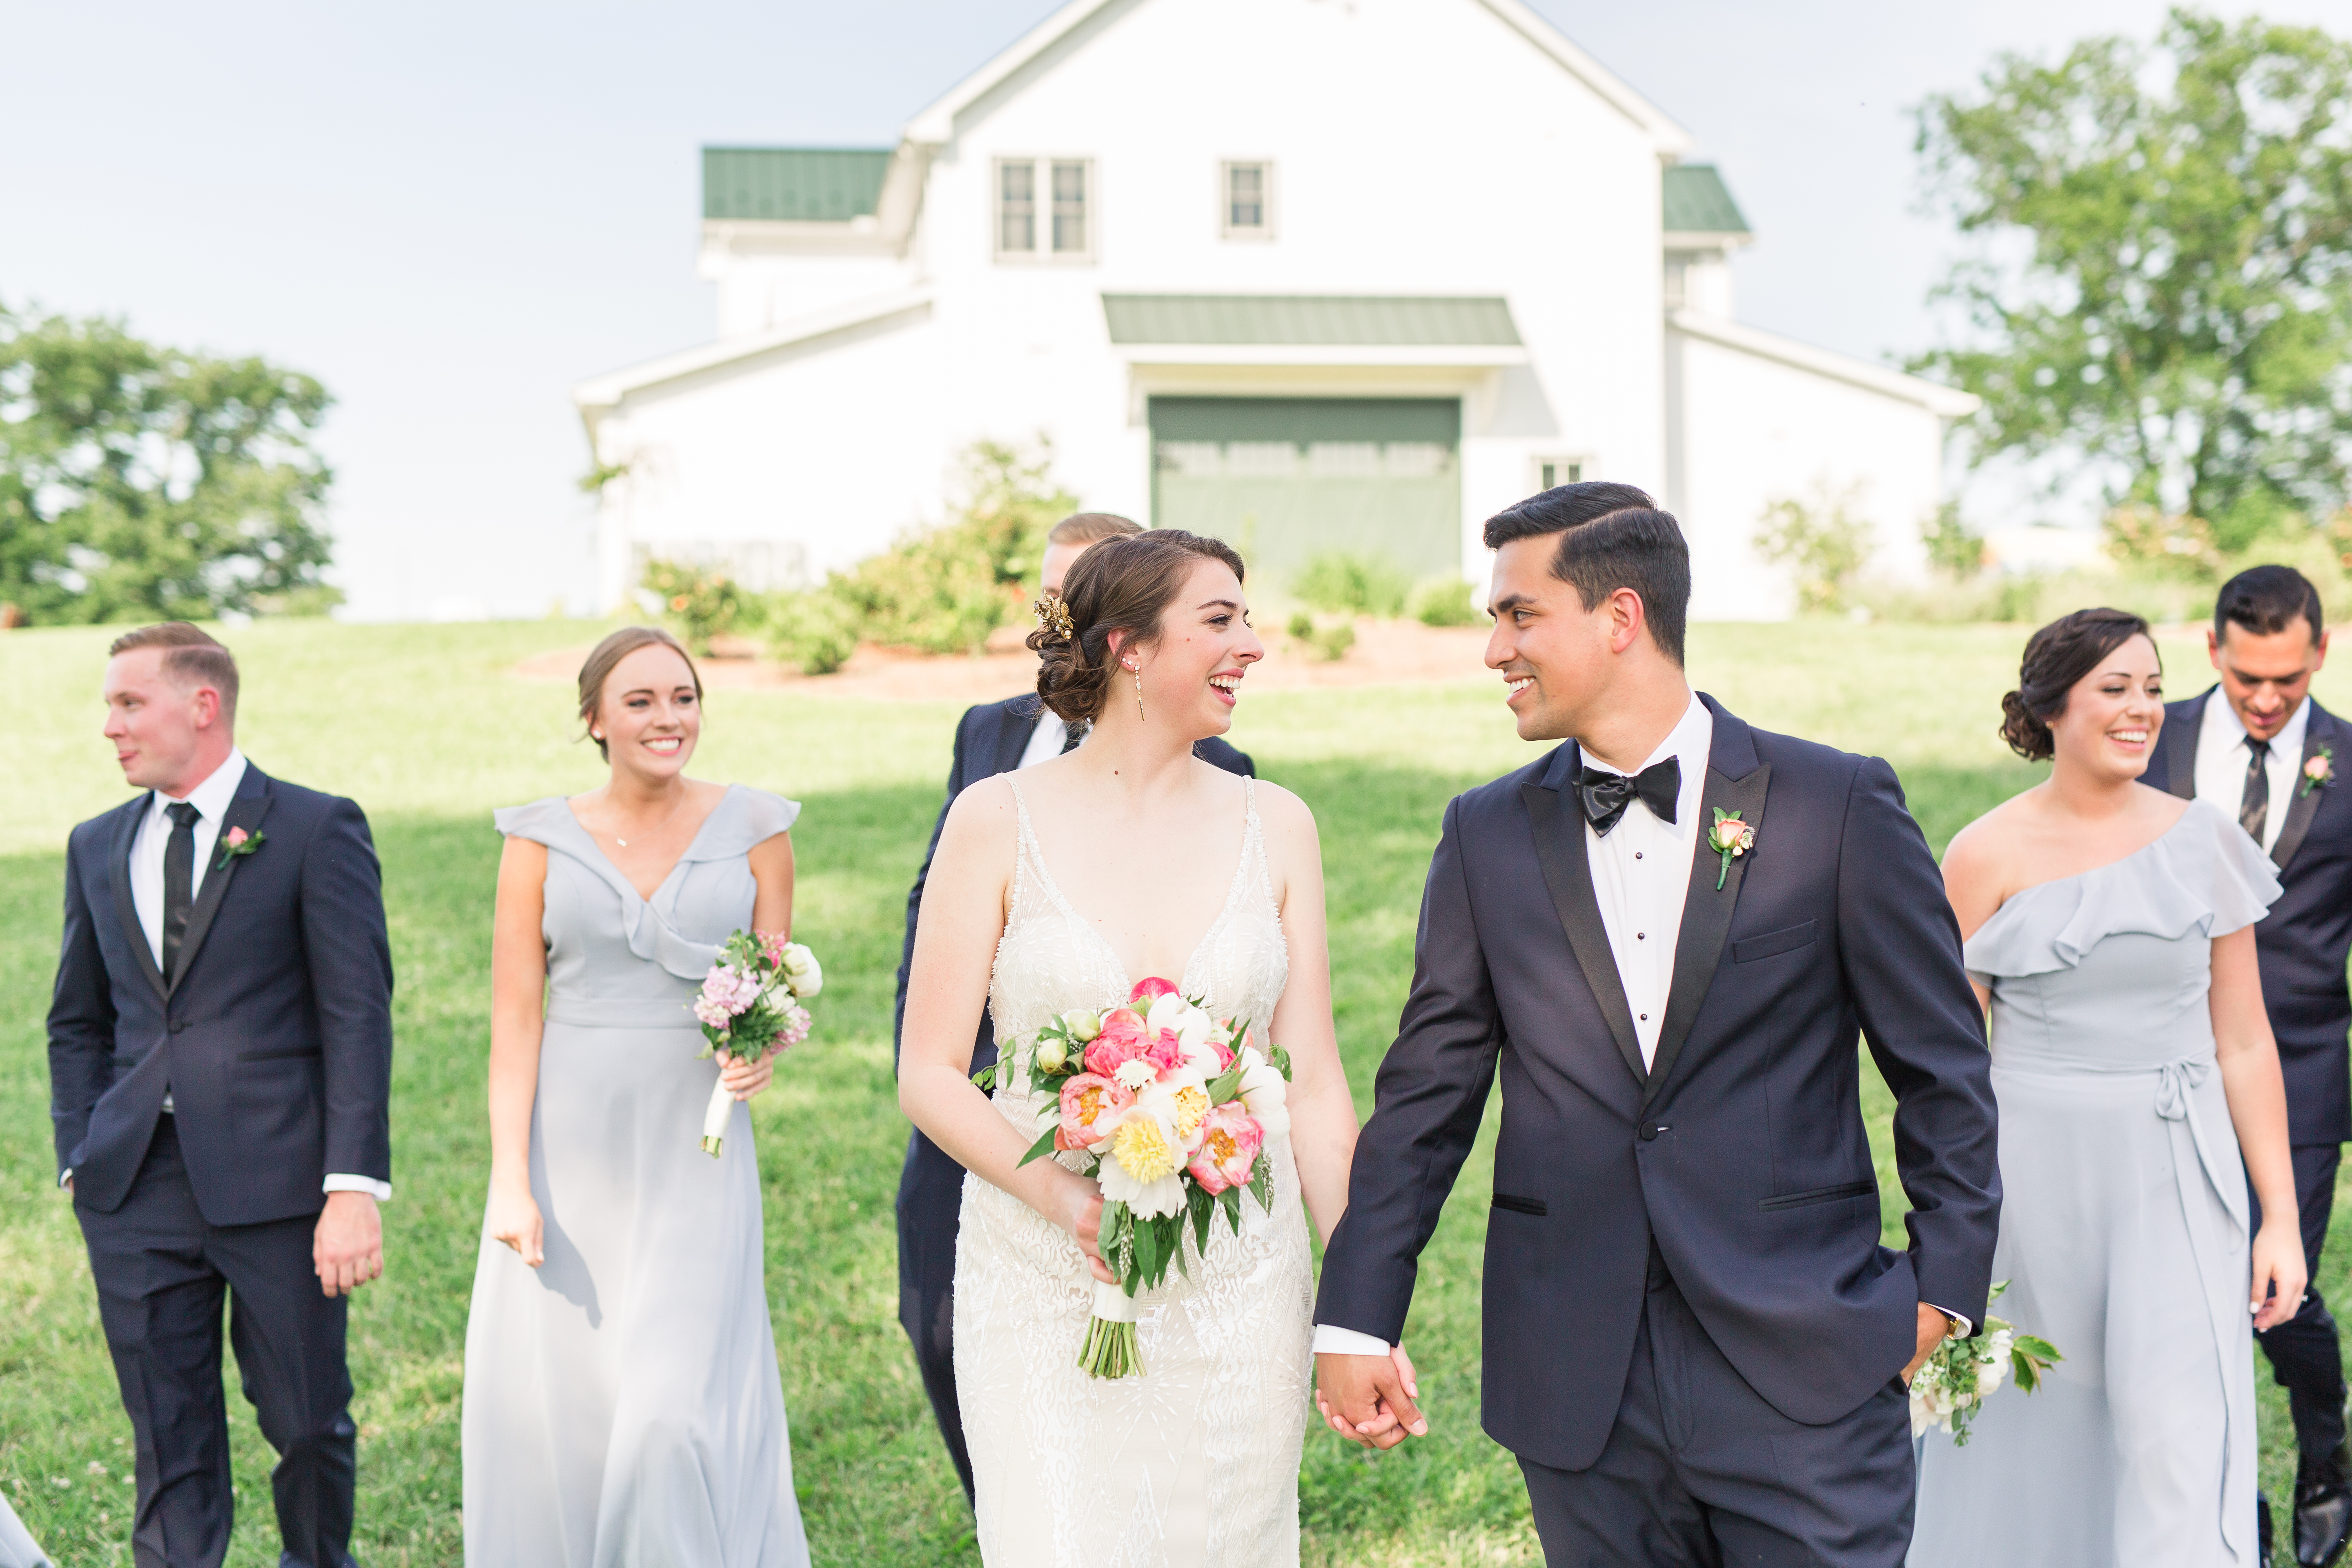 Bride and Groom walking with bridal party in front of barn venue